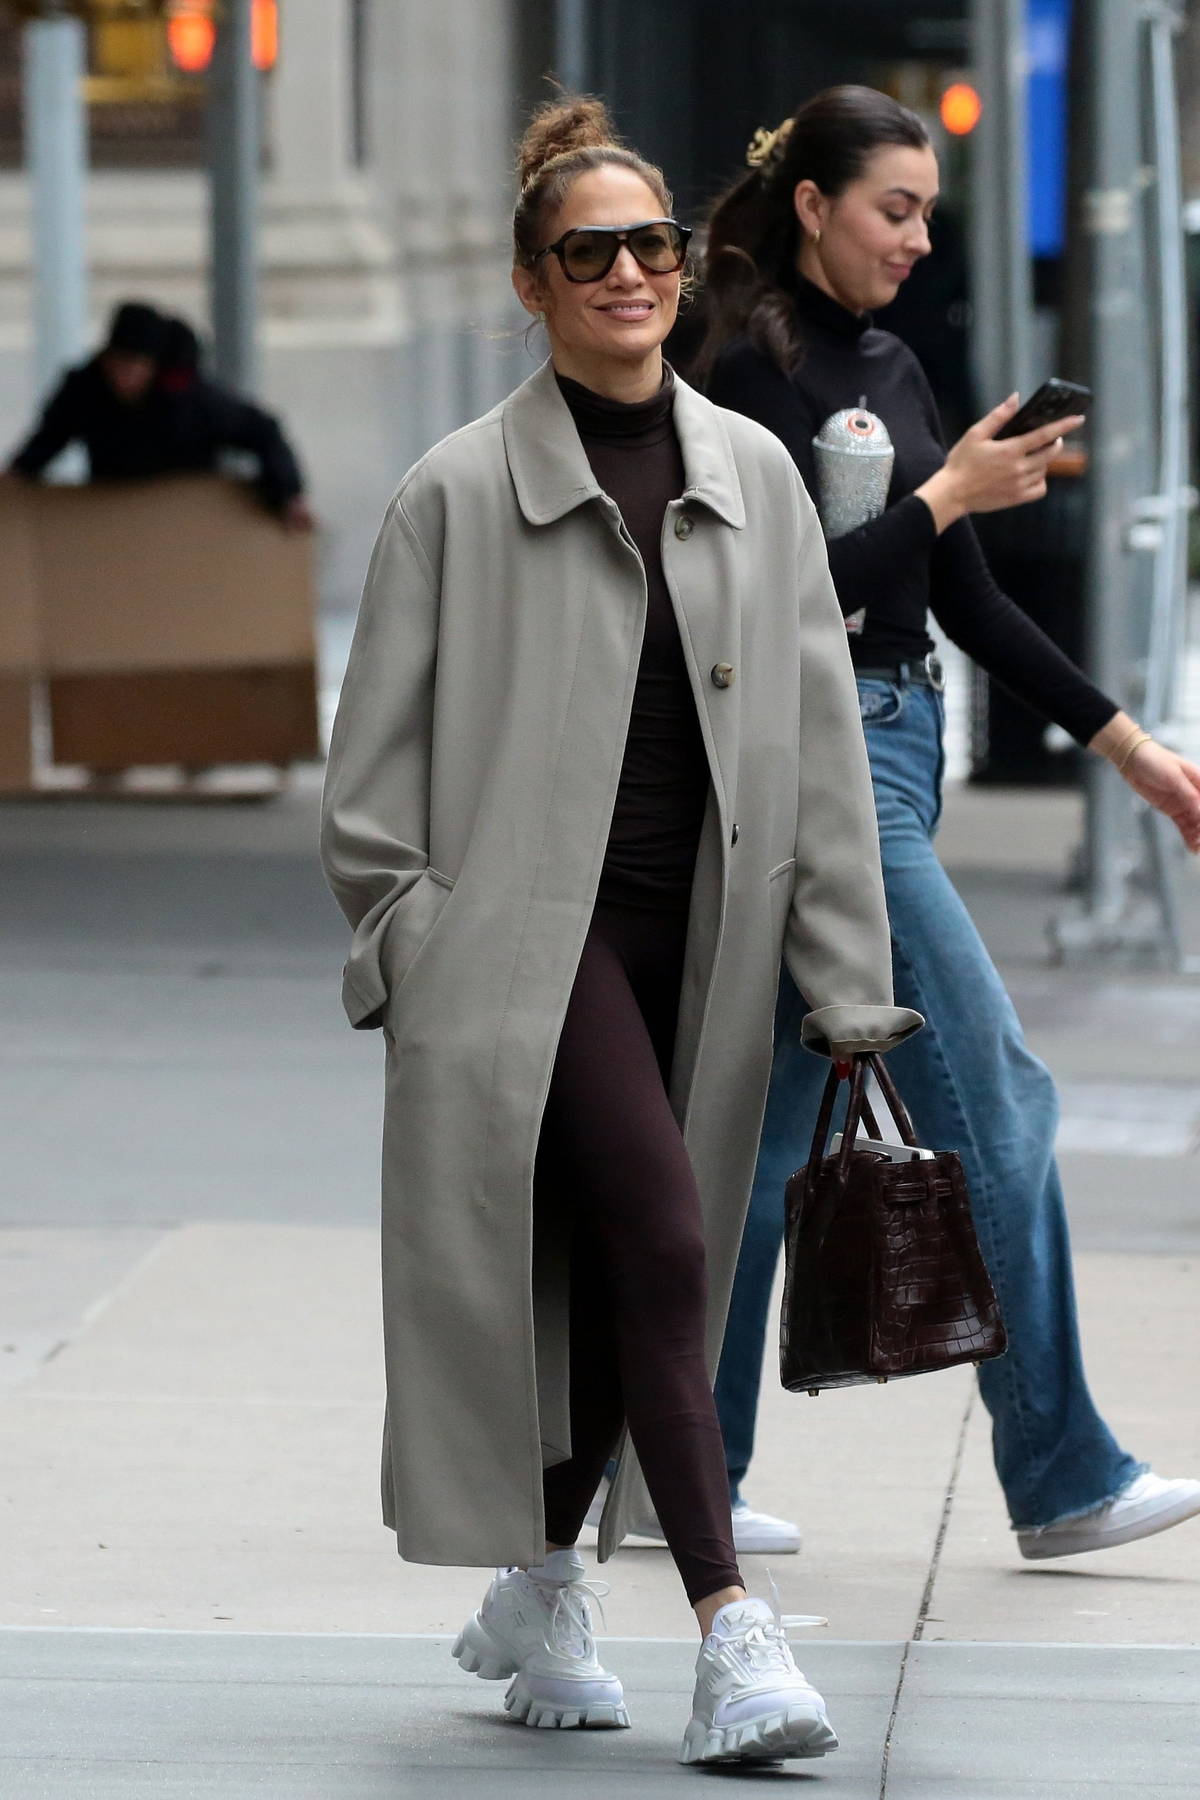 Jennifer Lopez sports brown top with matching leggings underneath a grey overcoat while heading out in New York City